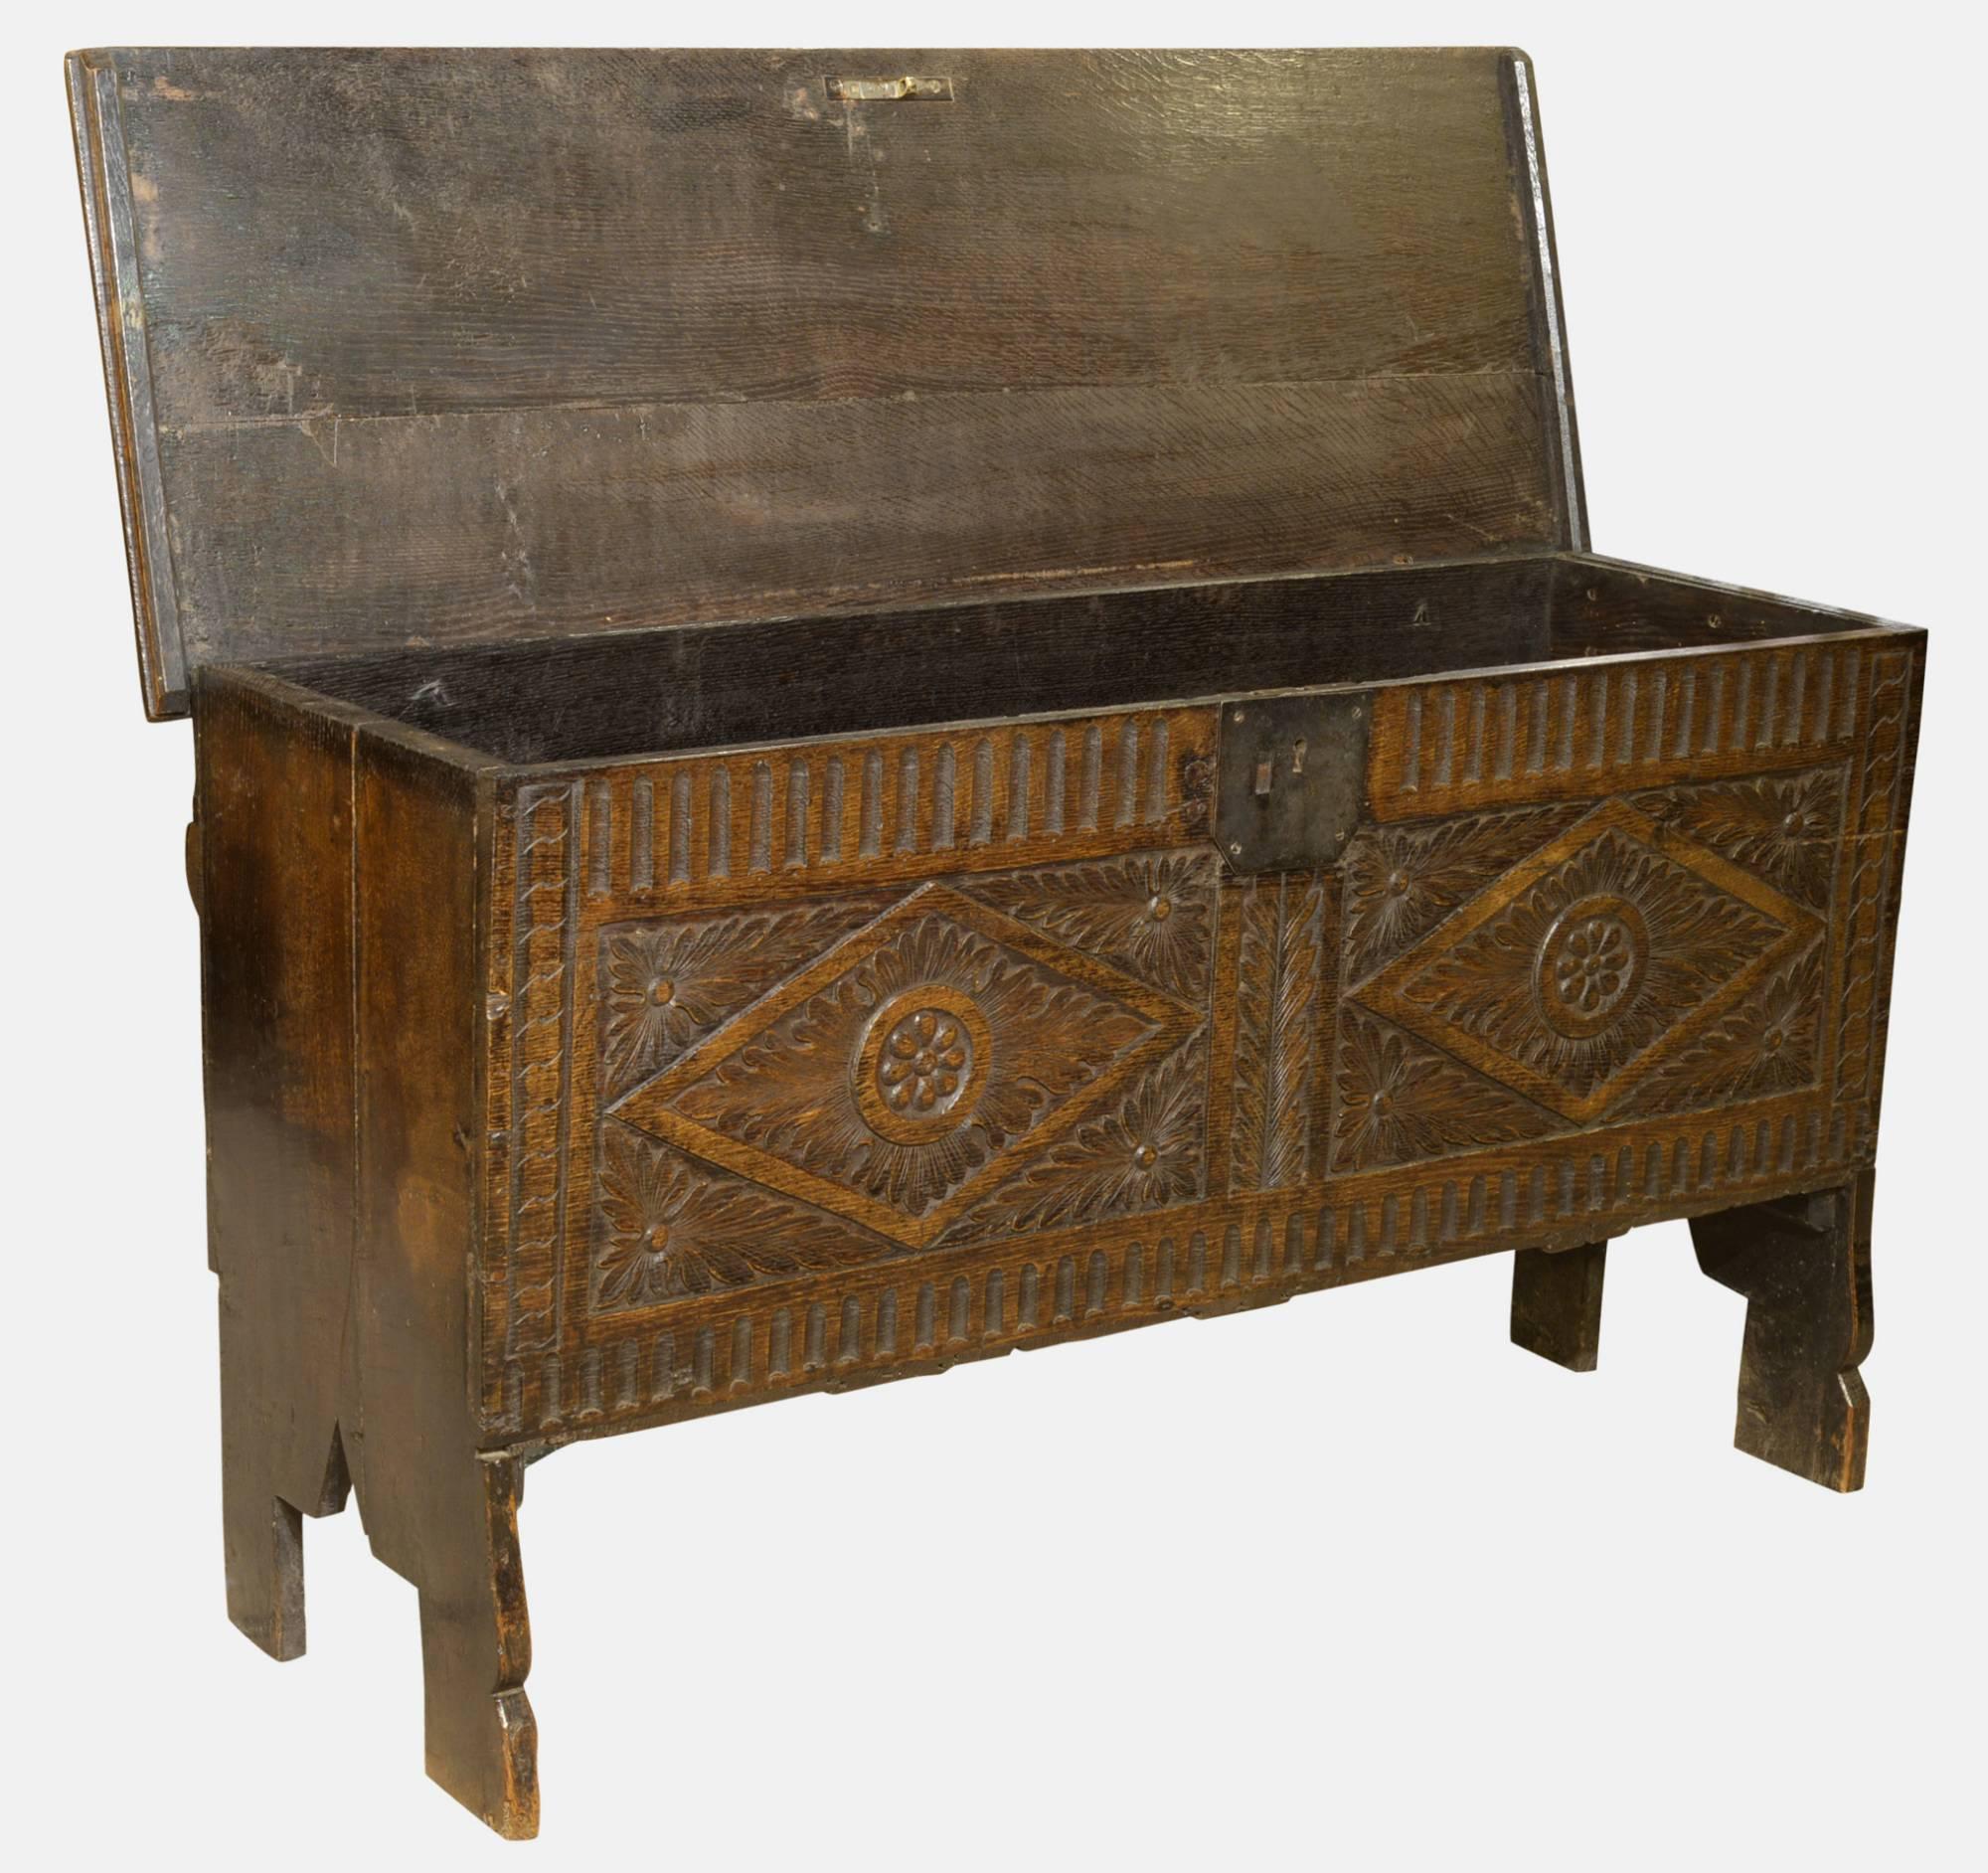 17th century oak carved front six plank coffer,

circa 1770.
 